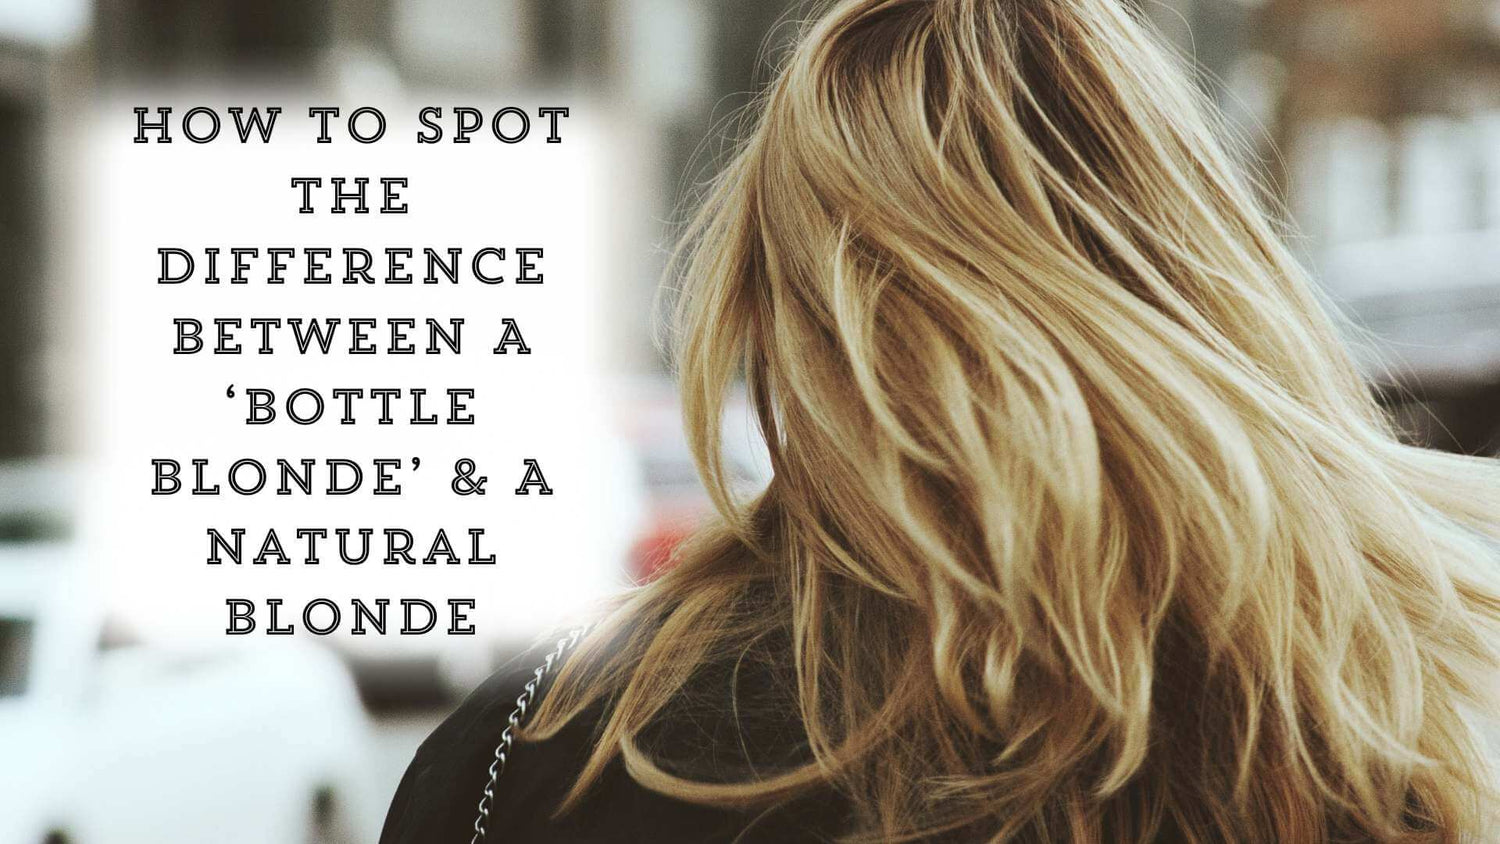 How To Spot The Difference Between A ‘Bottle Blonde’ & A Natural Blonde